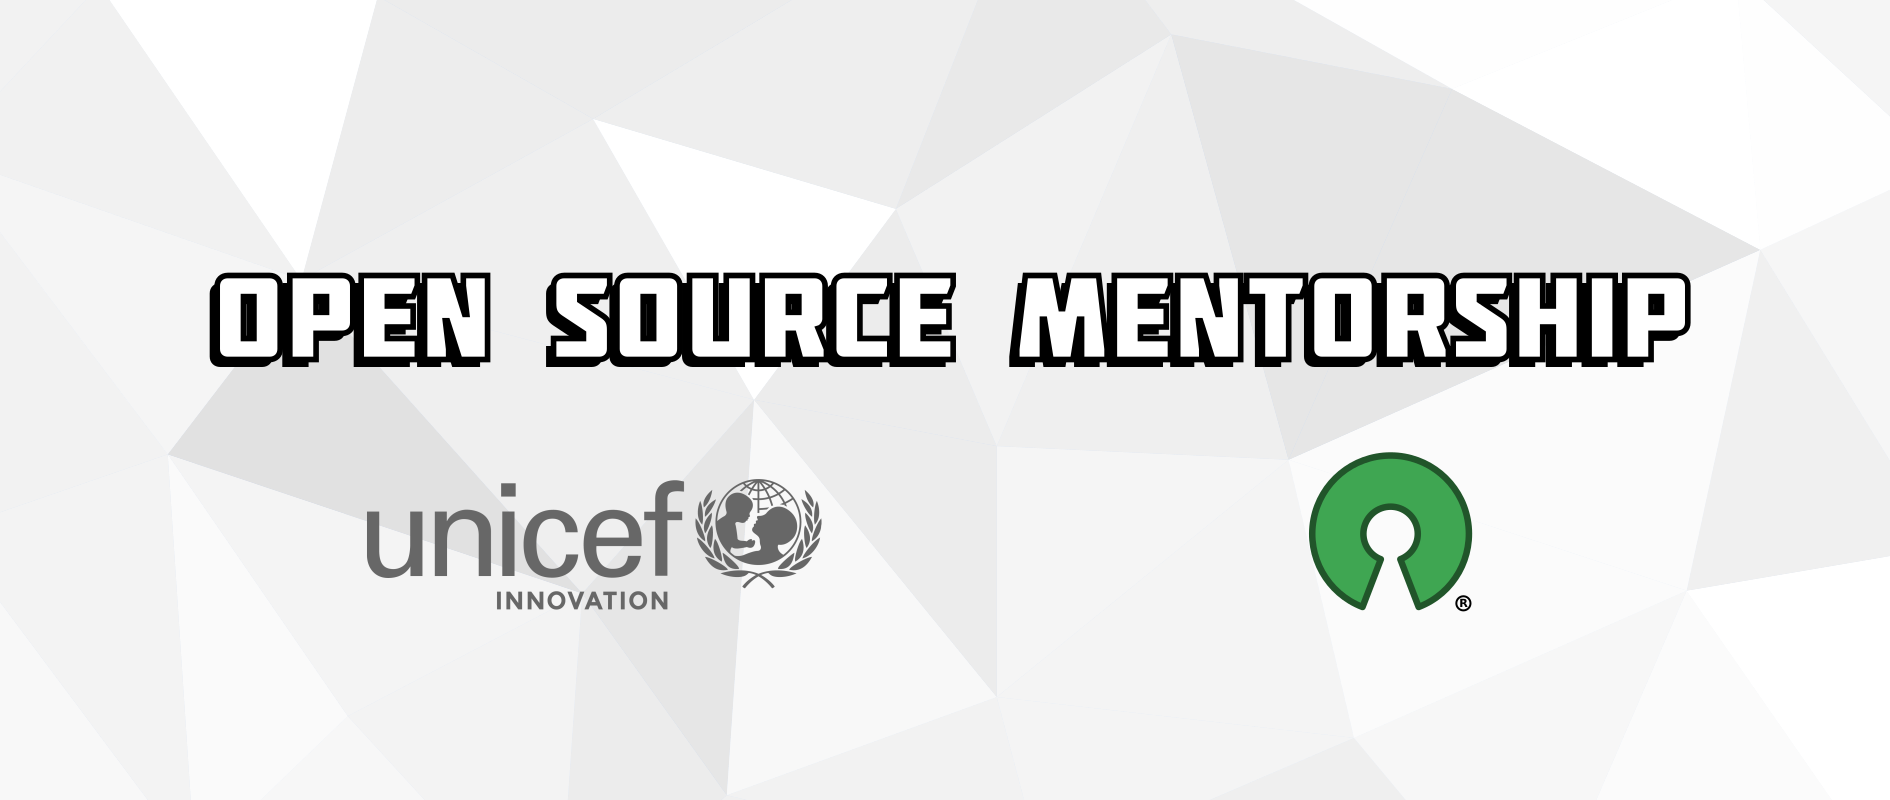 Introducing the UNICEF Open Source Mentorship programme